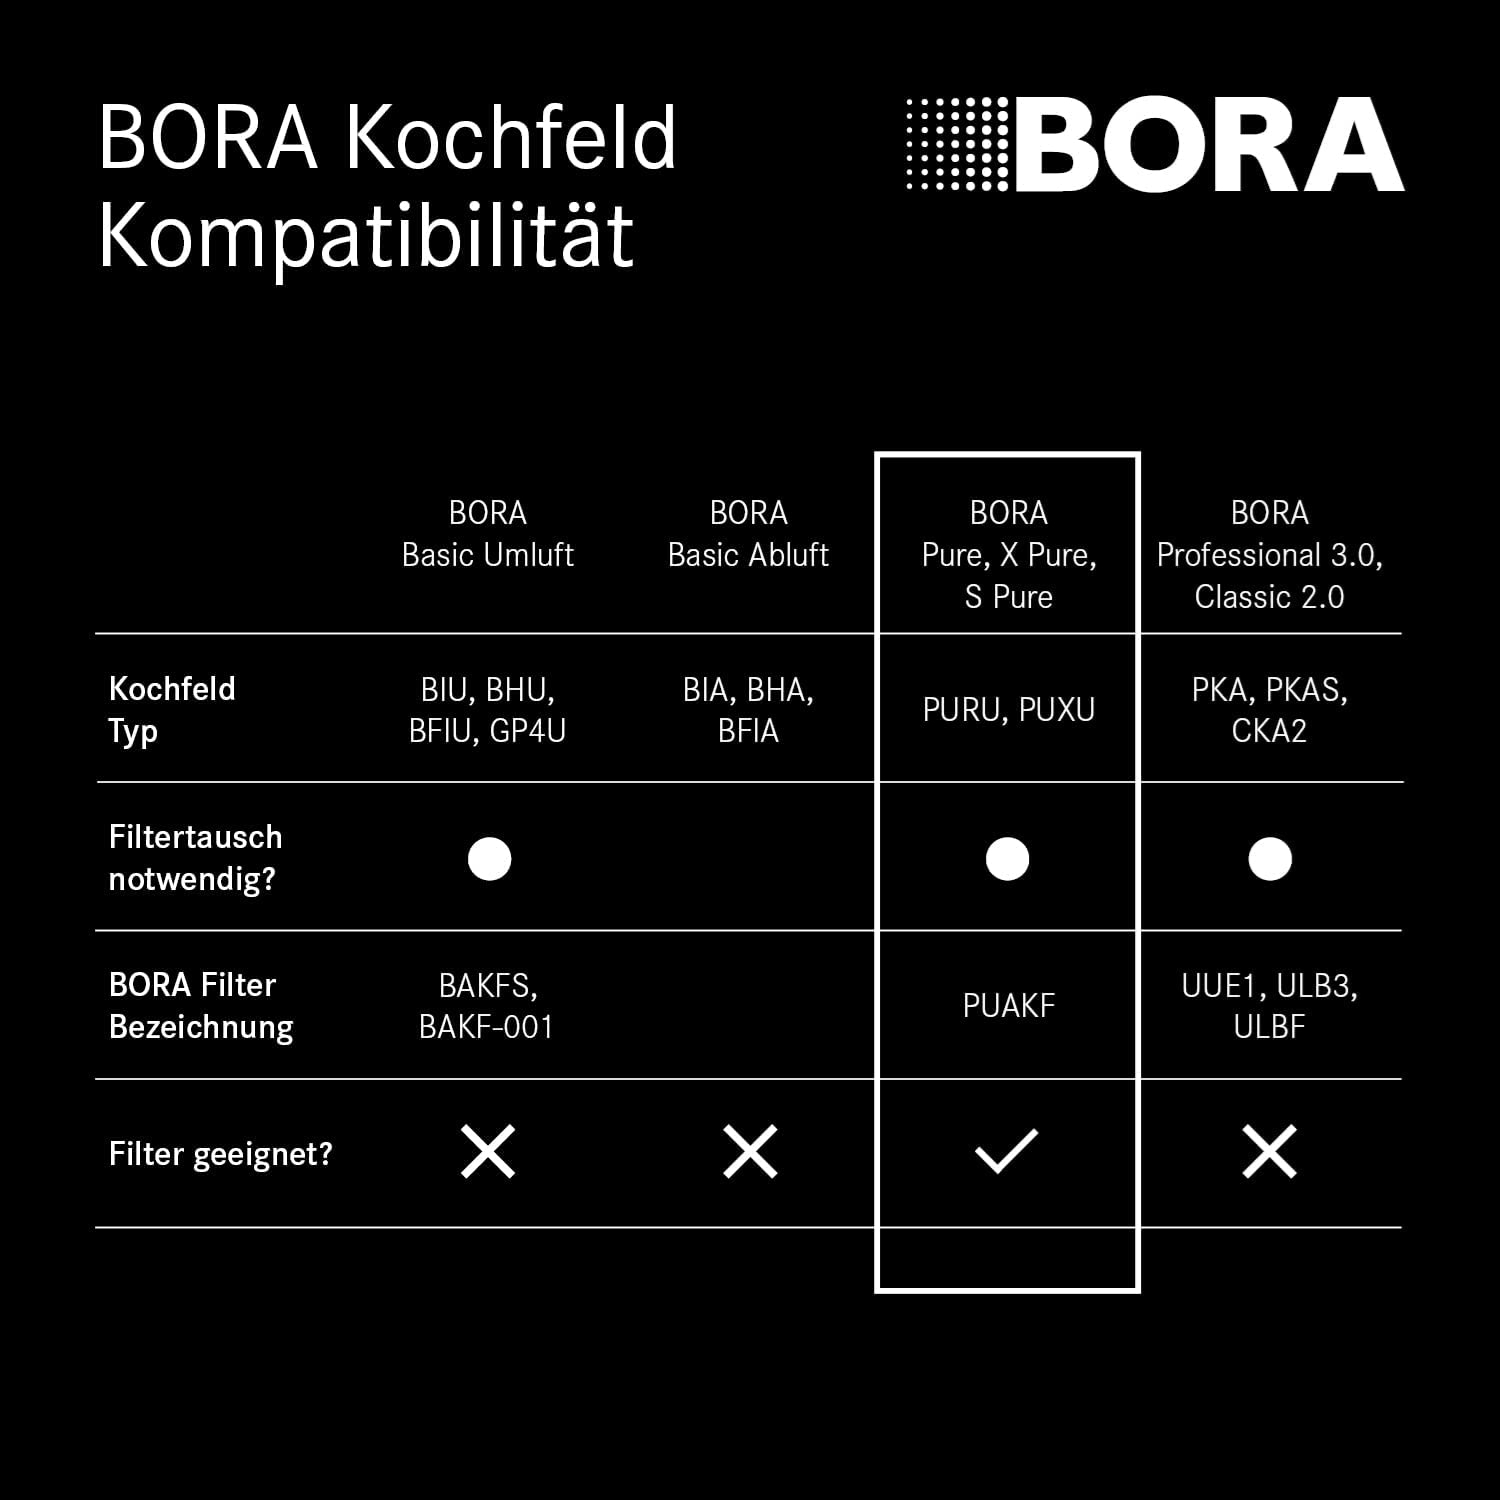 Buy BORA PURE Activated Carbon Filter (PUAKF) for PURE Hobs (PURU